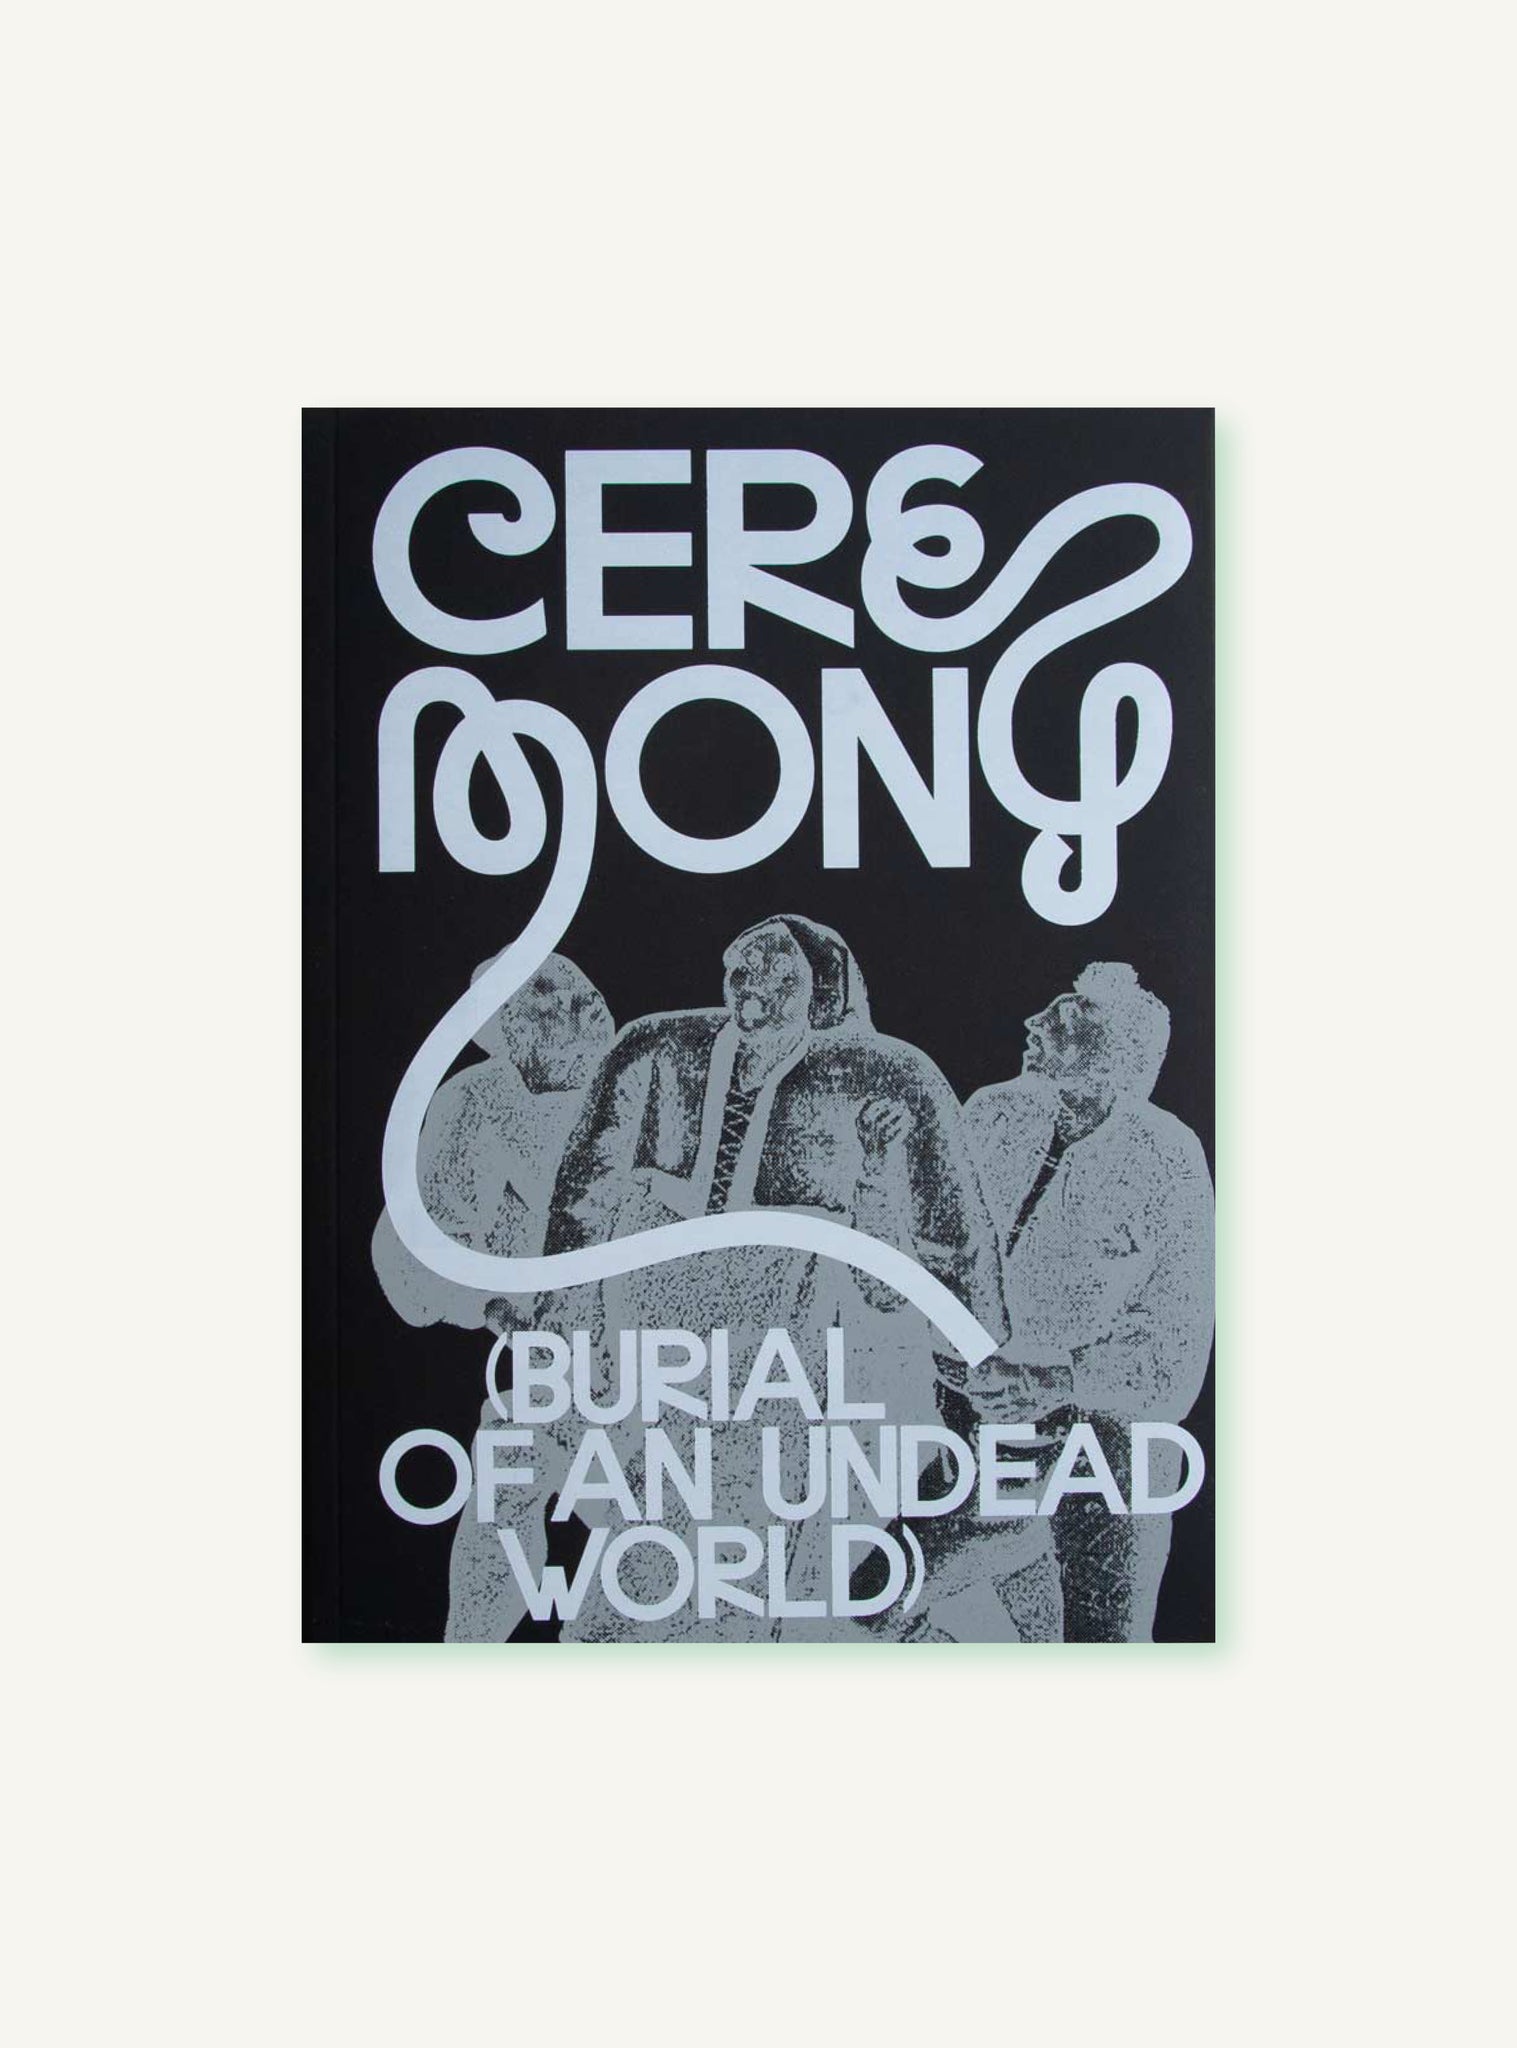 Ceremony (Burial of an Undead World)